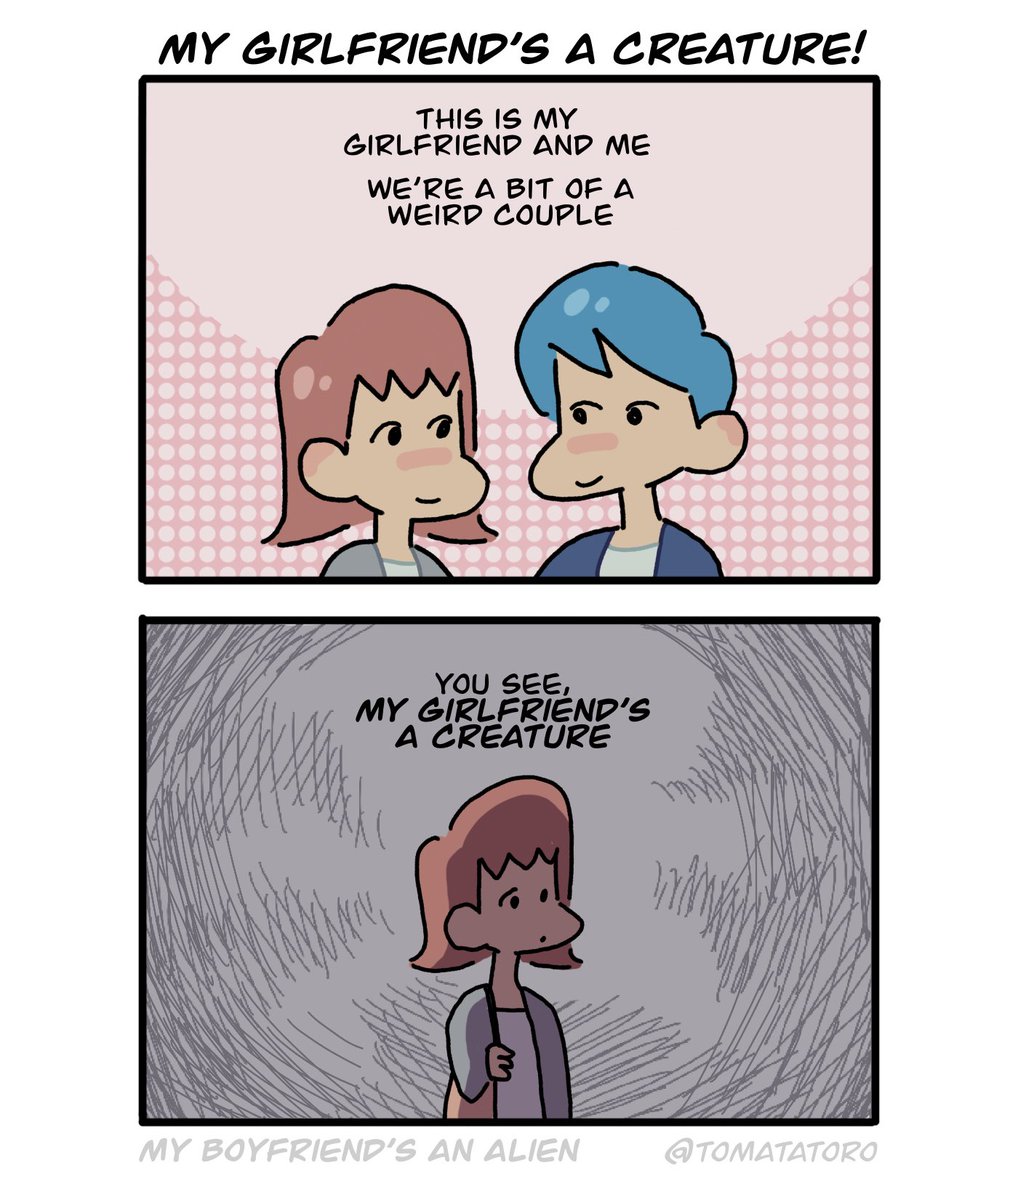 Episode 1: My Girlfriend's a Creature!
Subscribe on Tapas: https://t.co/BW70Sd94LC 